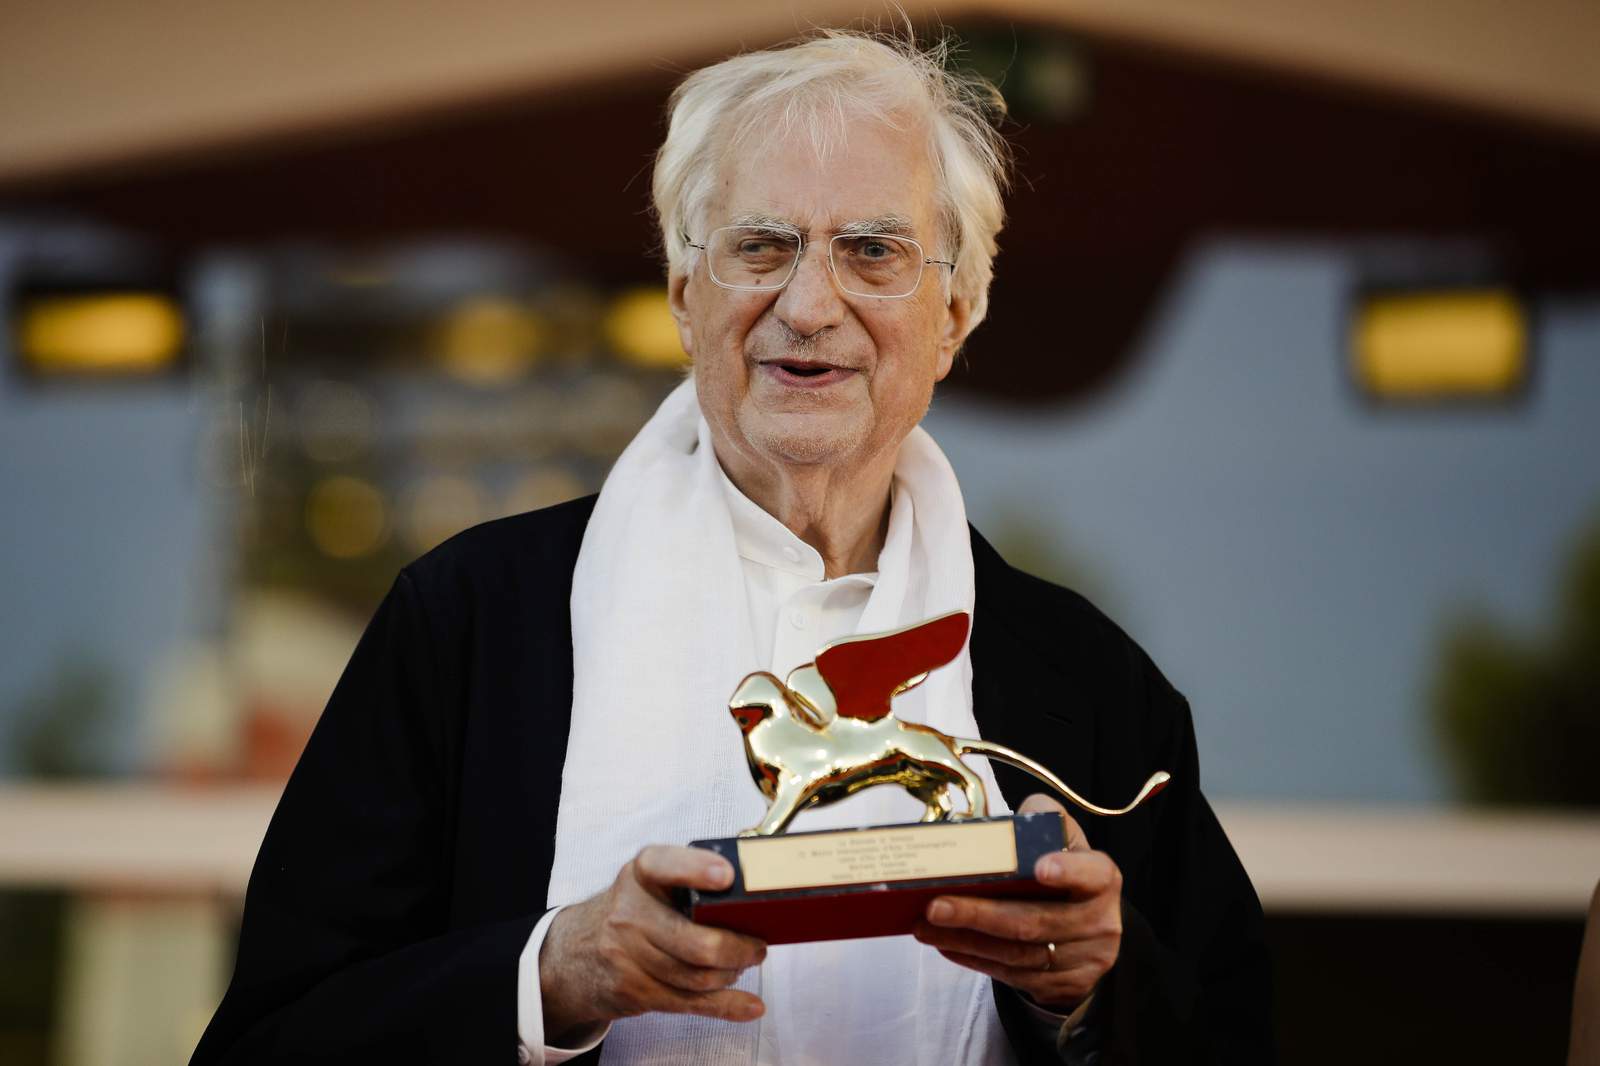 Acclaimed French director Bertrand Tavernier dies at age 79